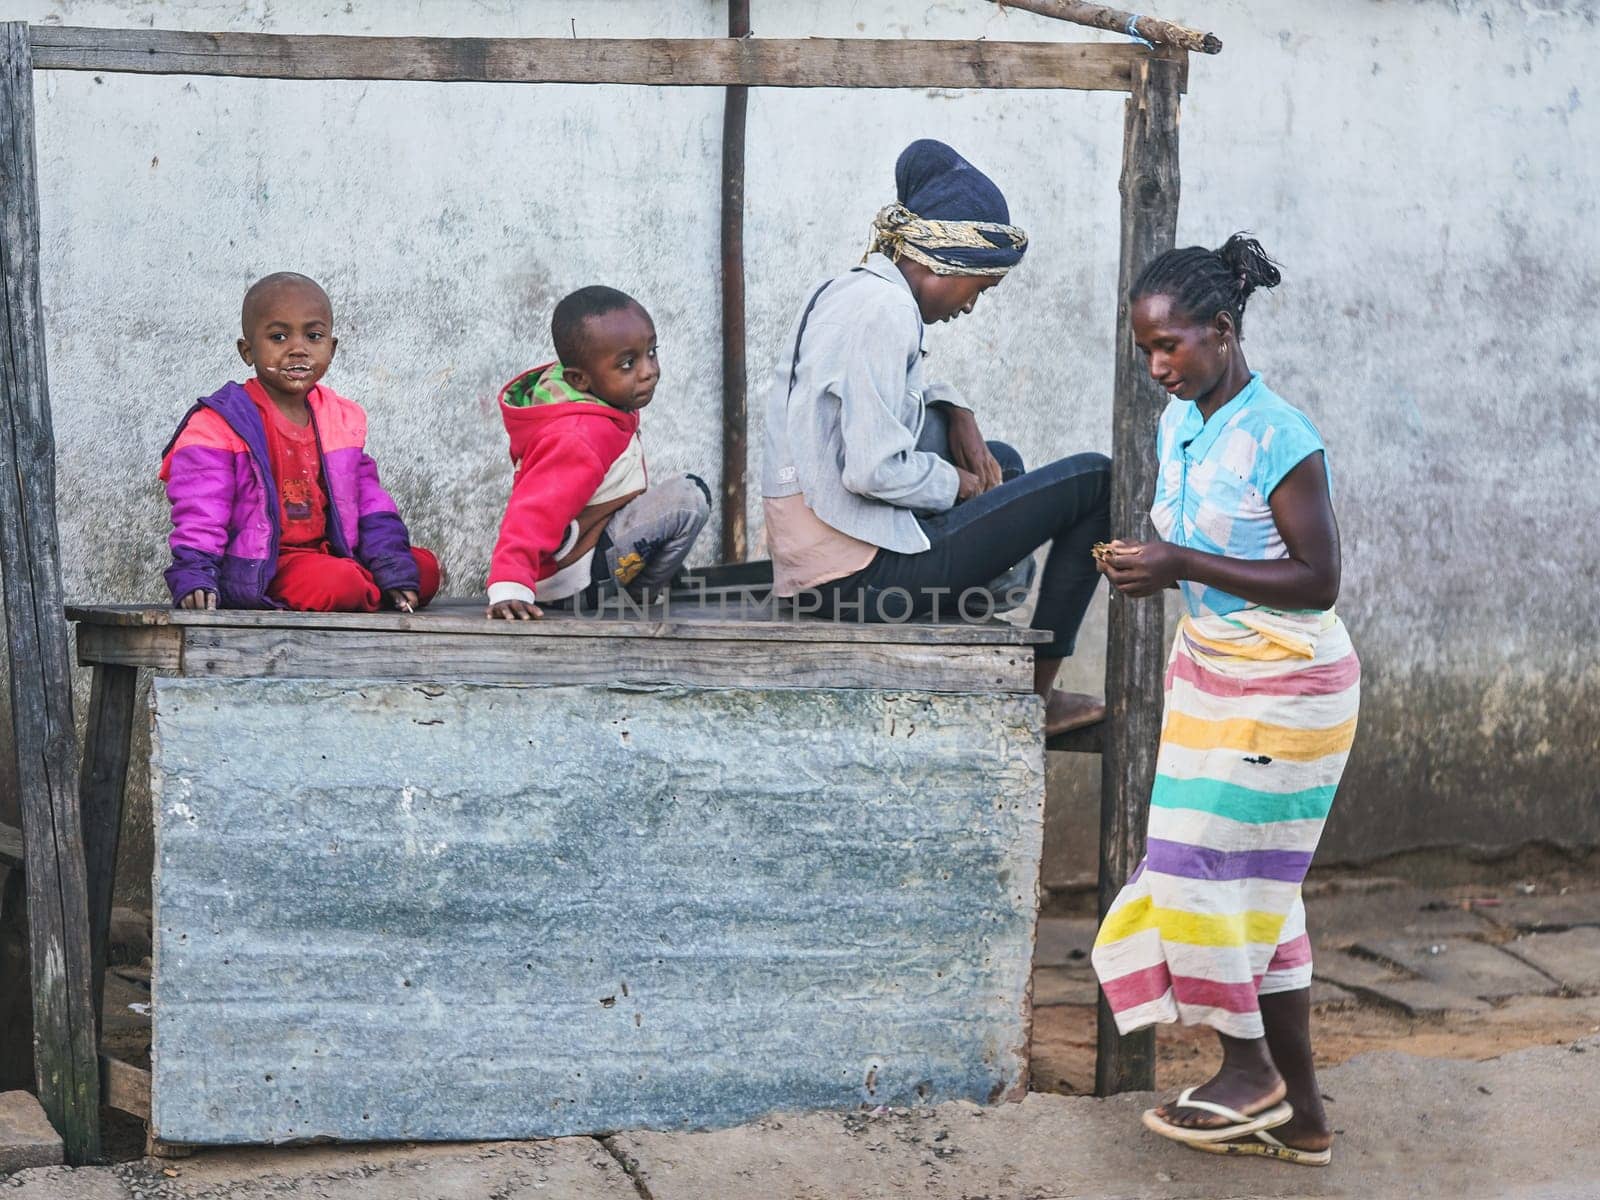 Ranohira, Madagascar - April 29, 2019: Four unknown Malagasy children playing next to unused wooden market stall, smallest sitting on top desk. Children in Madagascar are poor but cheerful